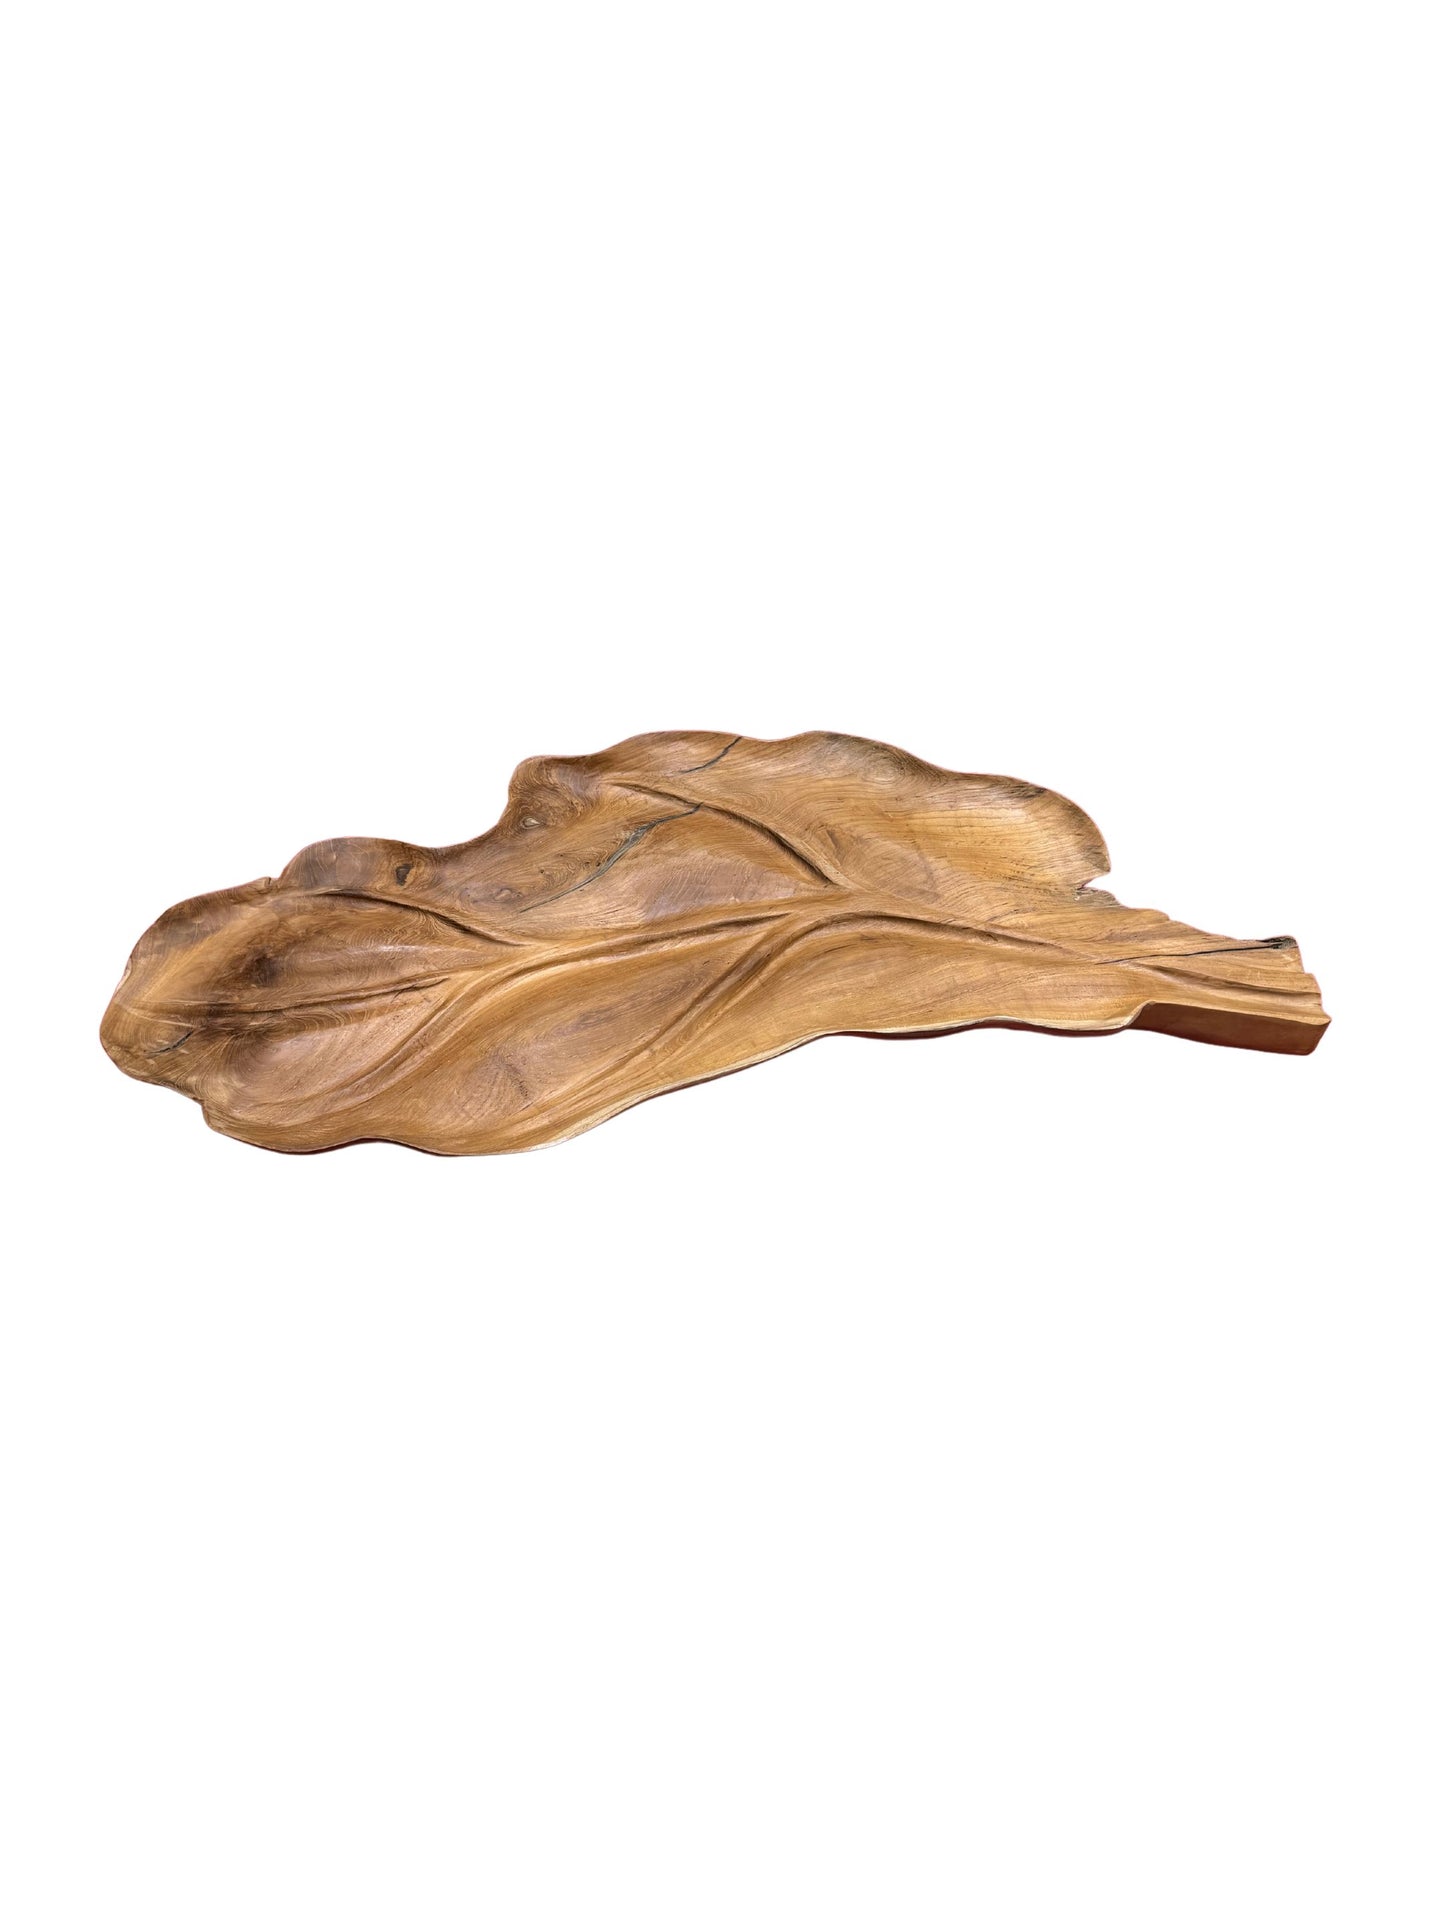 Eclectic Home Accent Teak Leaf Plate 1127 Wooden Decor Furniture